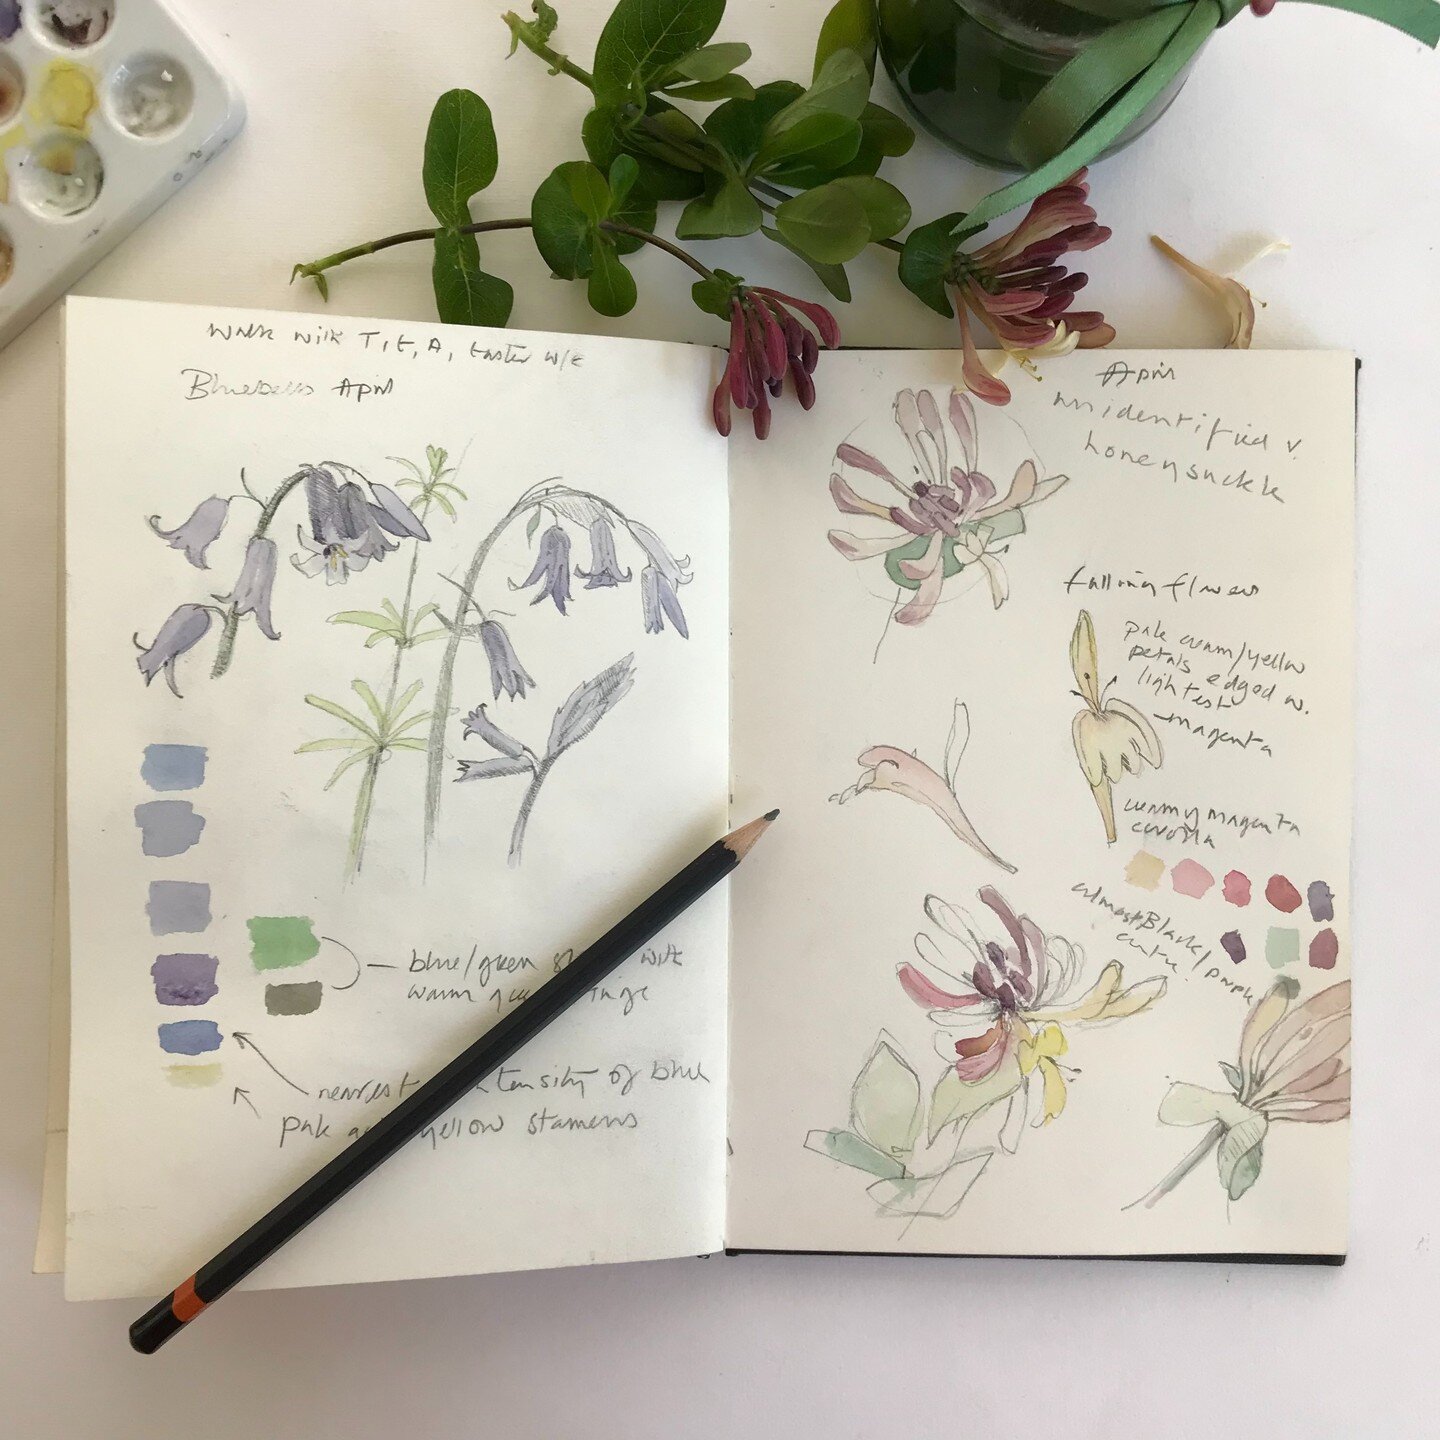 My fascination with drawing flowers remains wherever else my work takes me.
Today it&rsquo;s honeysuckle picked from the garden. 

#drawingflowers
#womenwhoweed
#inmygarden
#joyofdrawing
#suffolkartists
#gardenersinsuffolk
#artiststhatgarden
#artwork